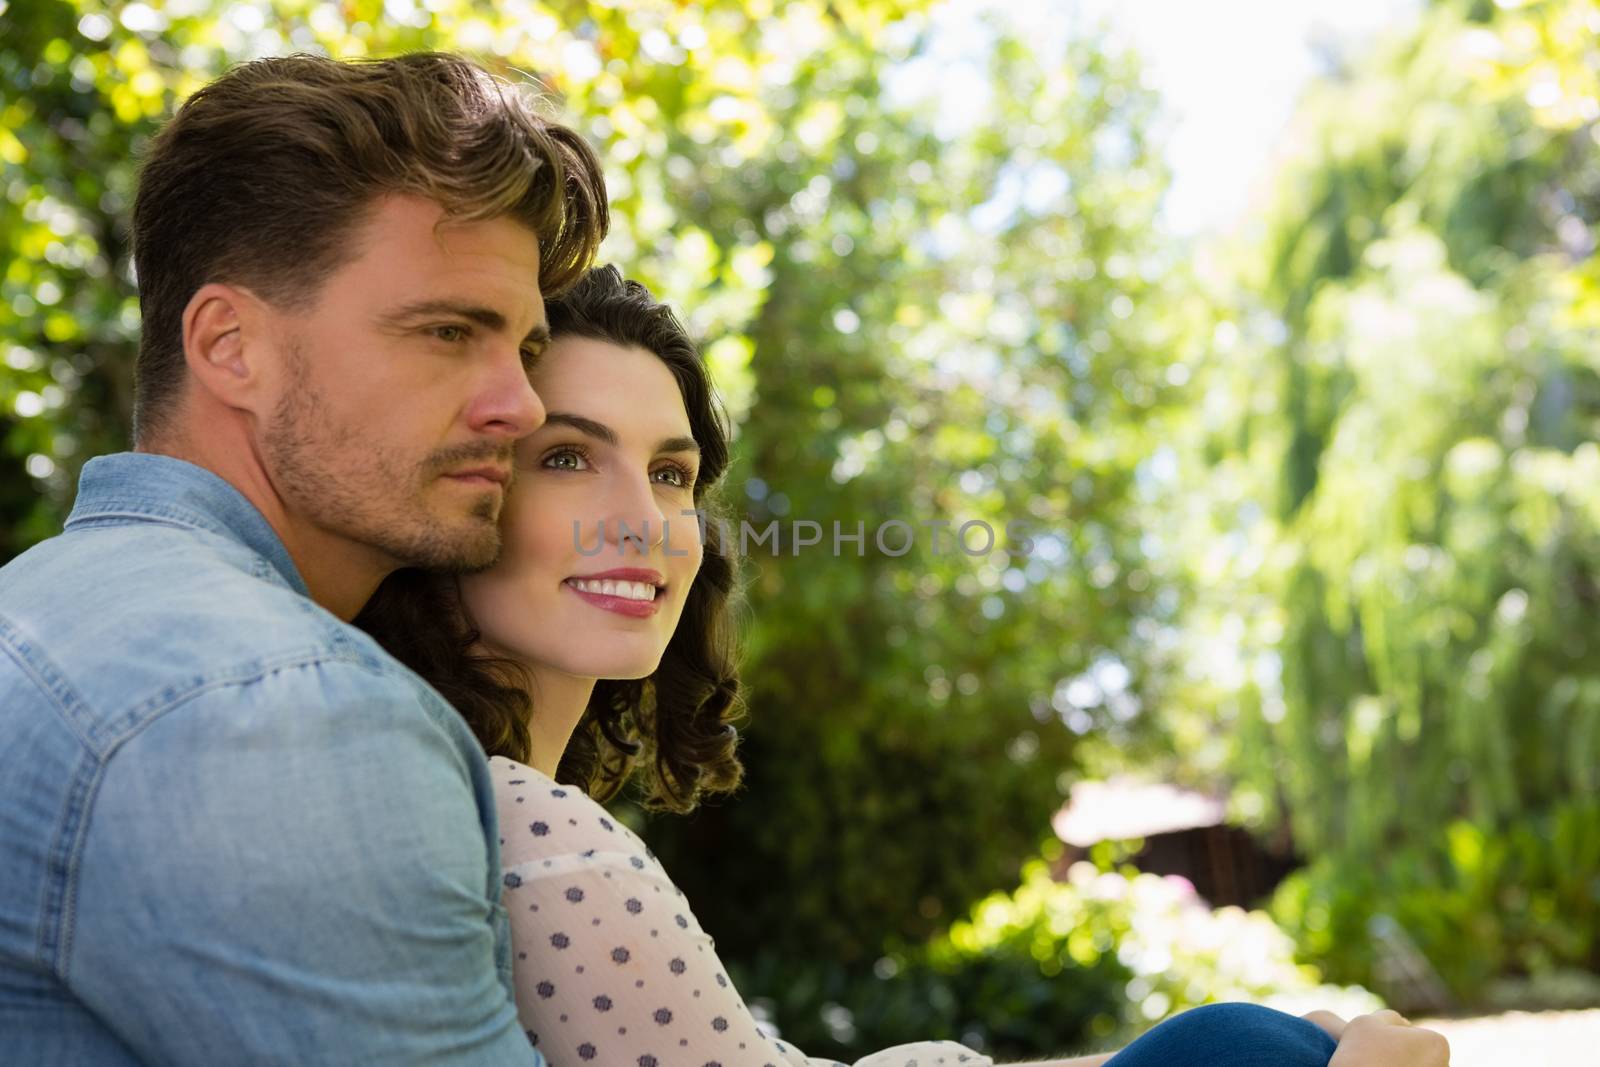 Couple embracing each other in garden on a sunny day by Wavebreakmedia